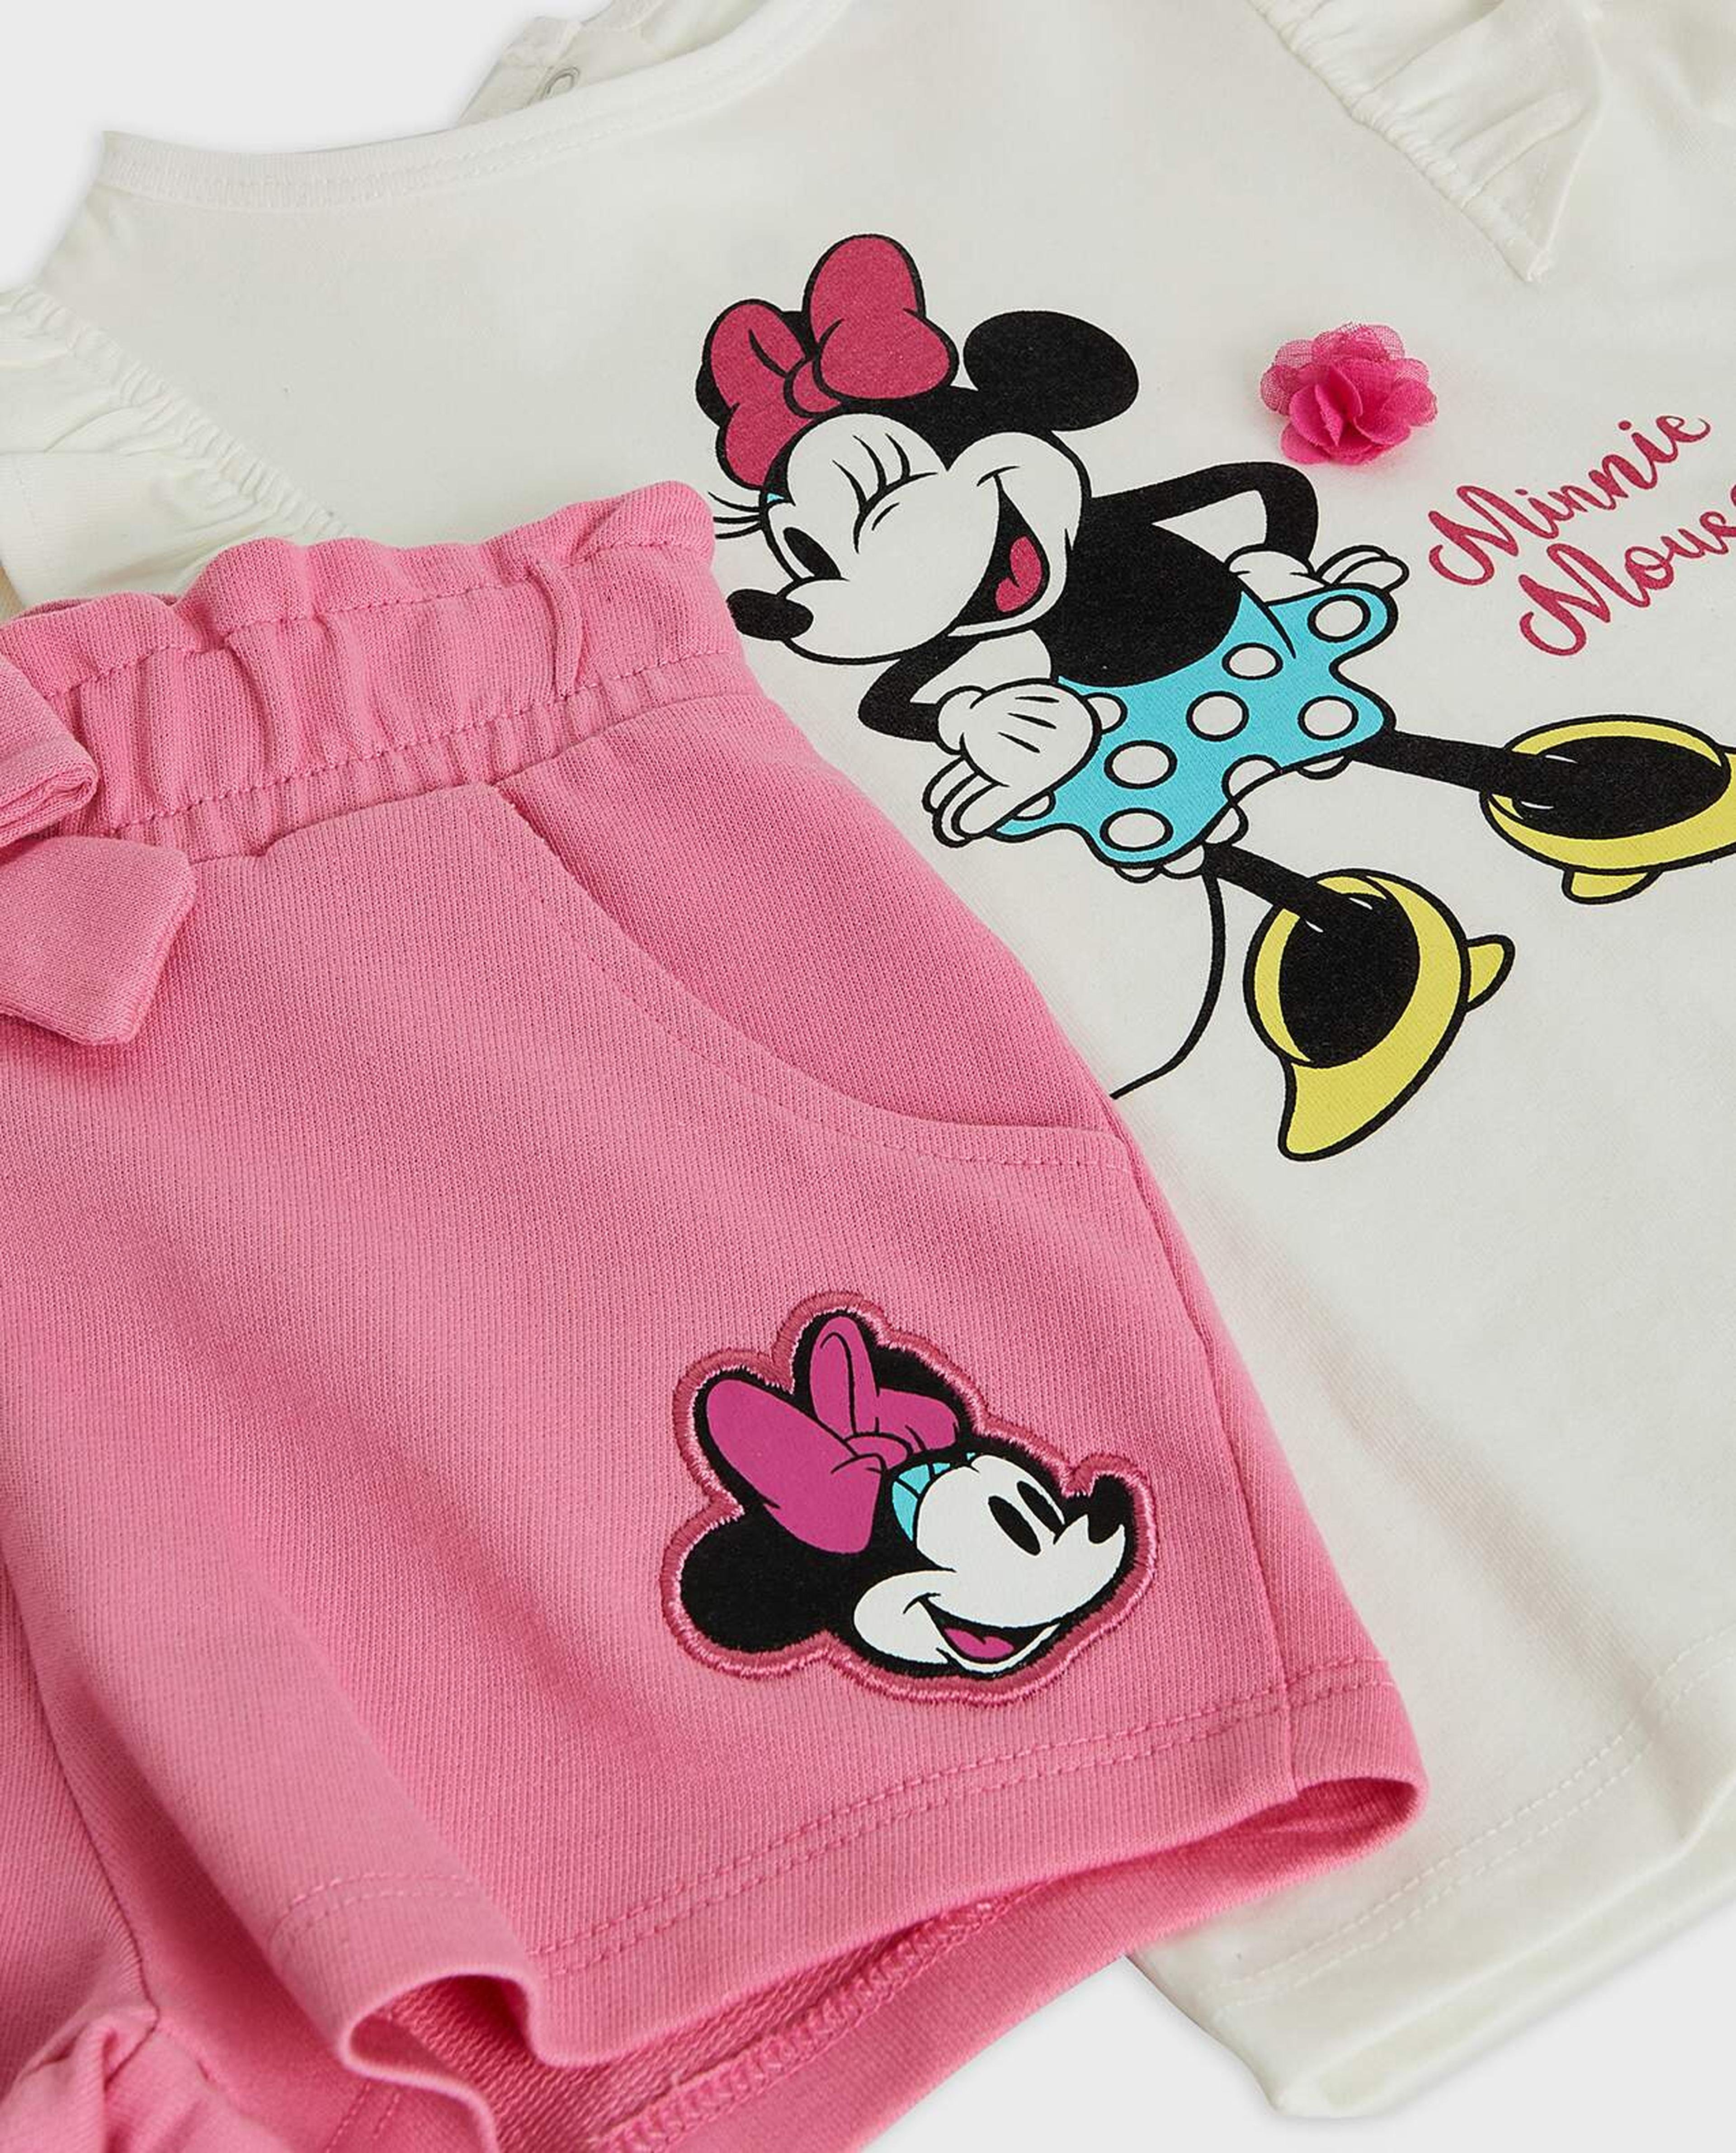 Minnie Mouse Print Top and Shorts Set